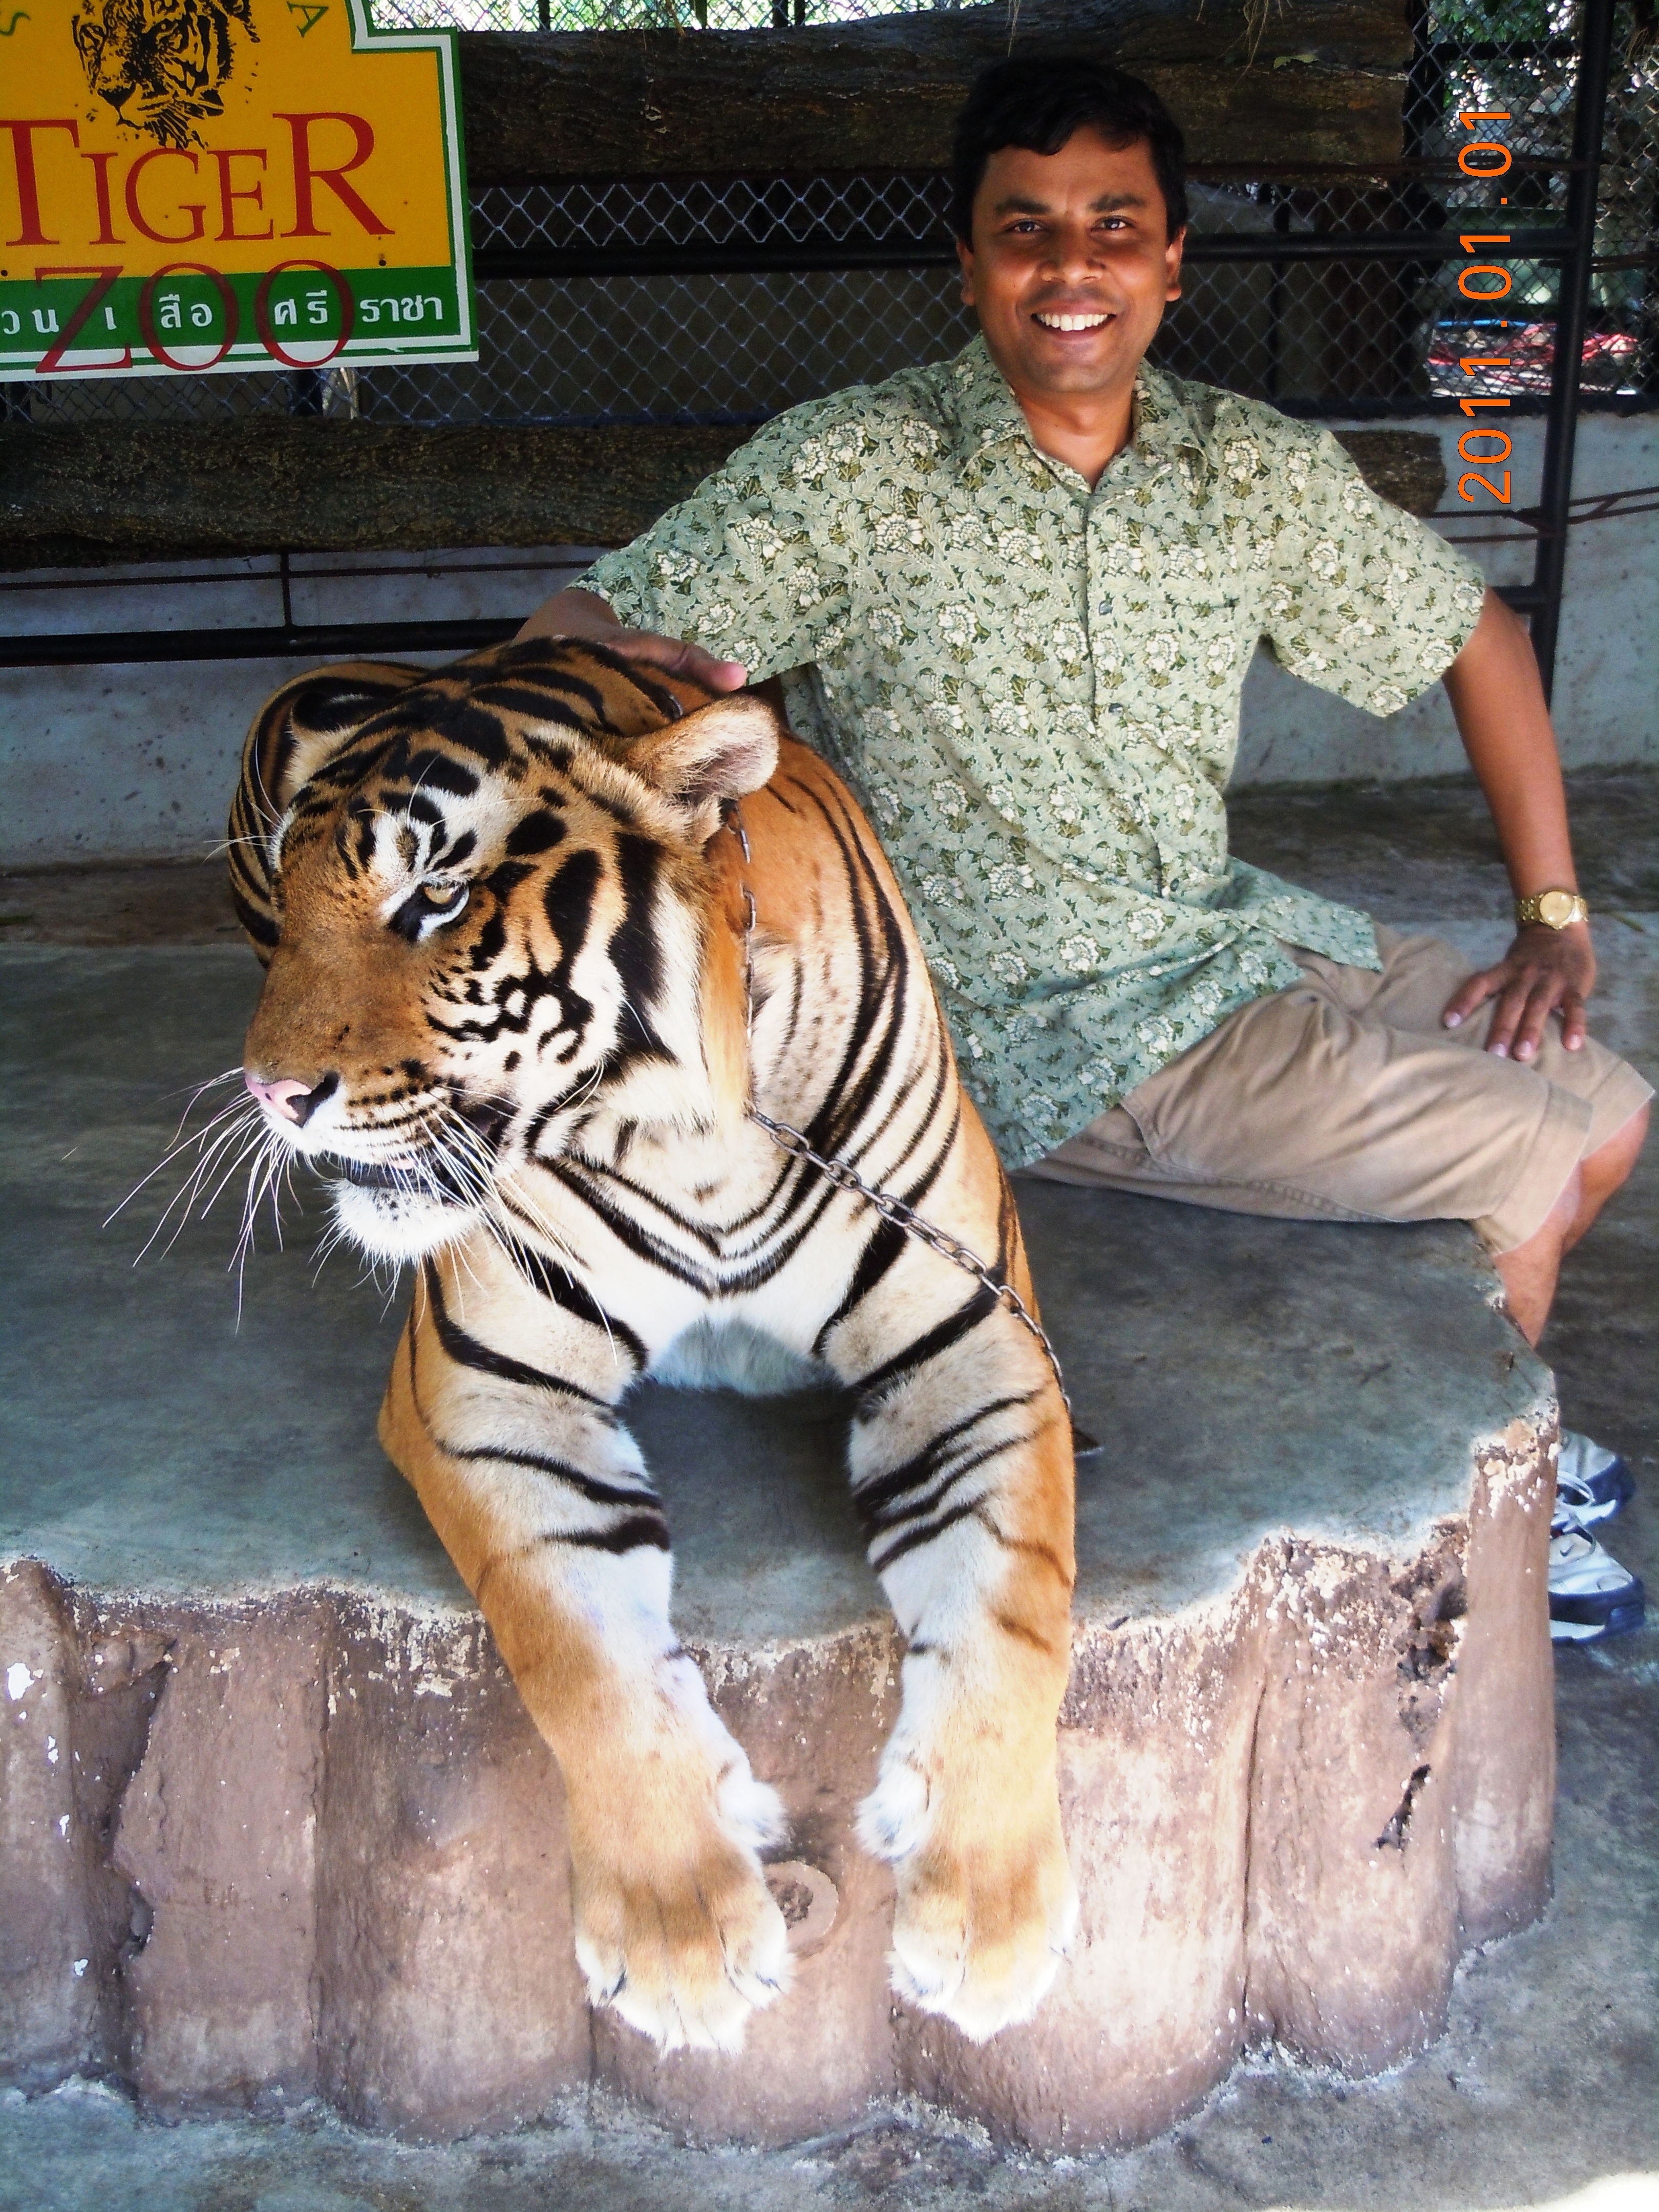 K Posing with the Tiger